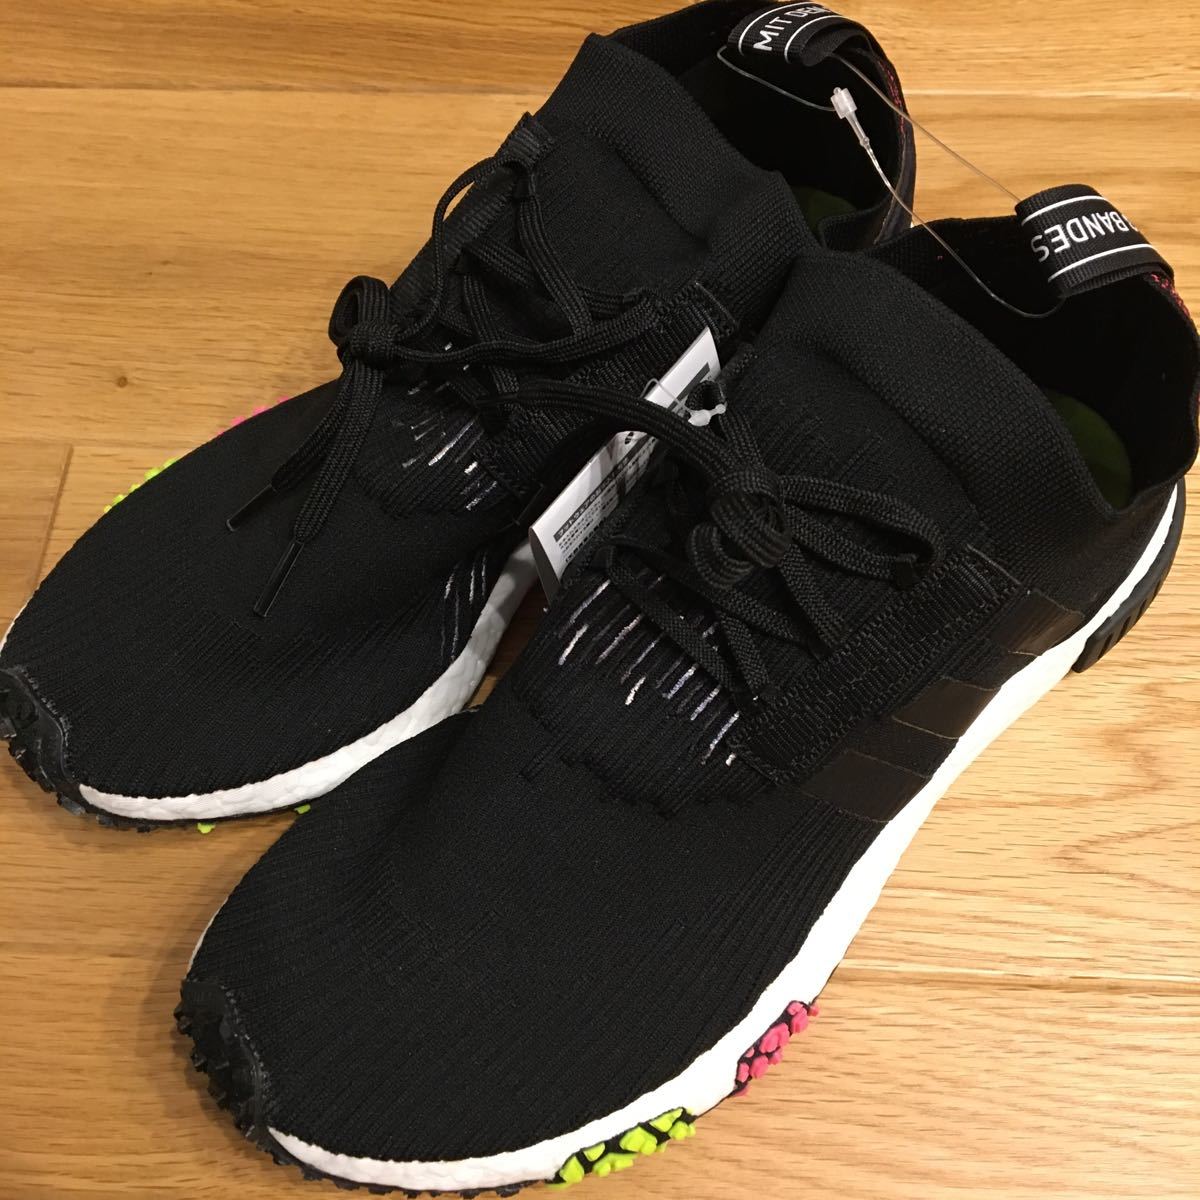  unused adidas NMD Racer PK 28cm RACER core black black CQ2441 ADIDAS Boost boost running prime knitted 